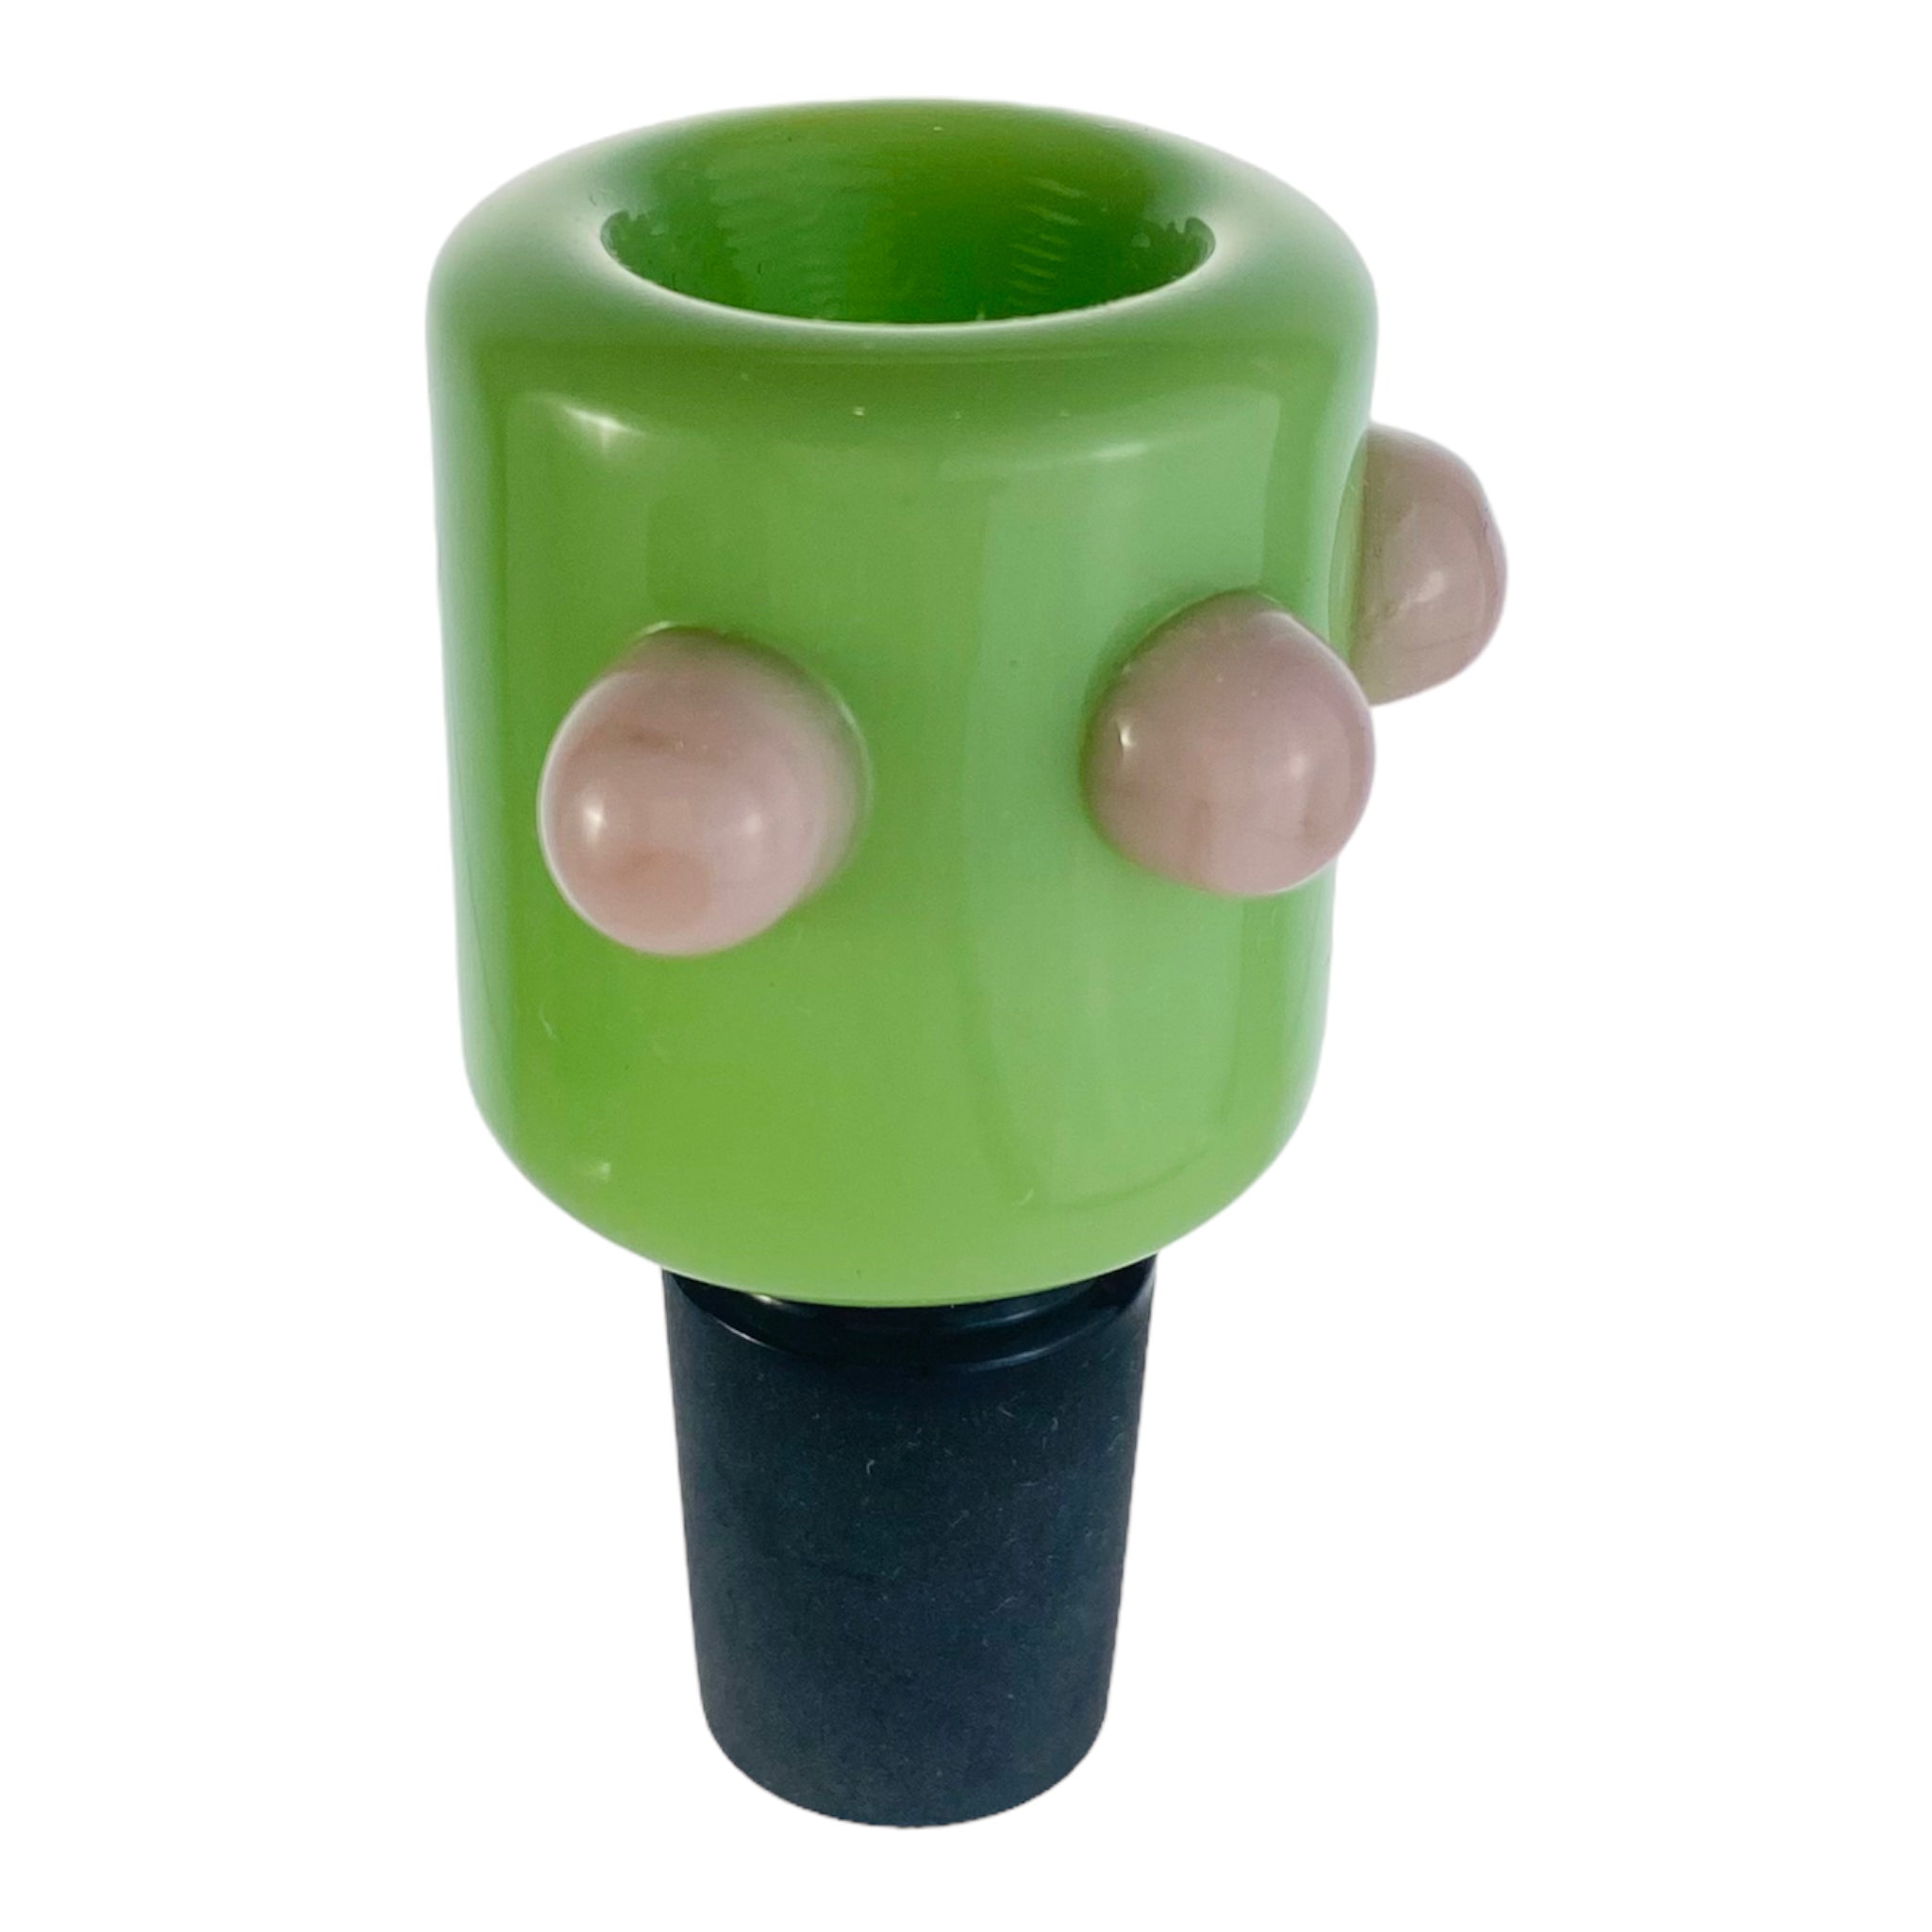 18mm Flower Bowl - Tall Slime Green Bubble With Pink Dots Bong Bowl Piece